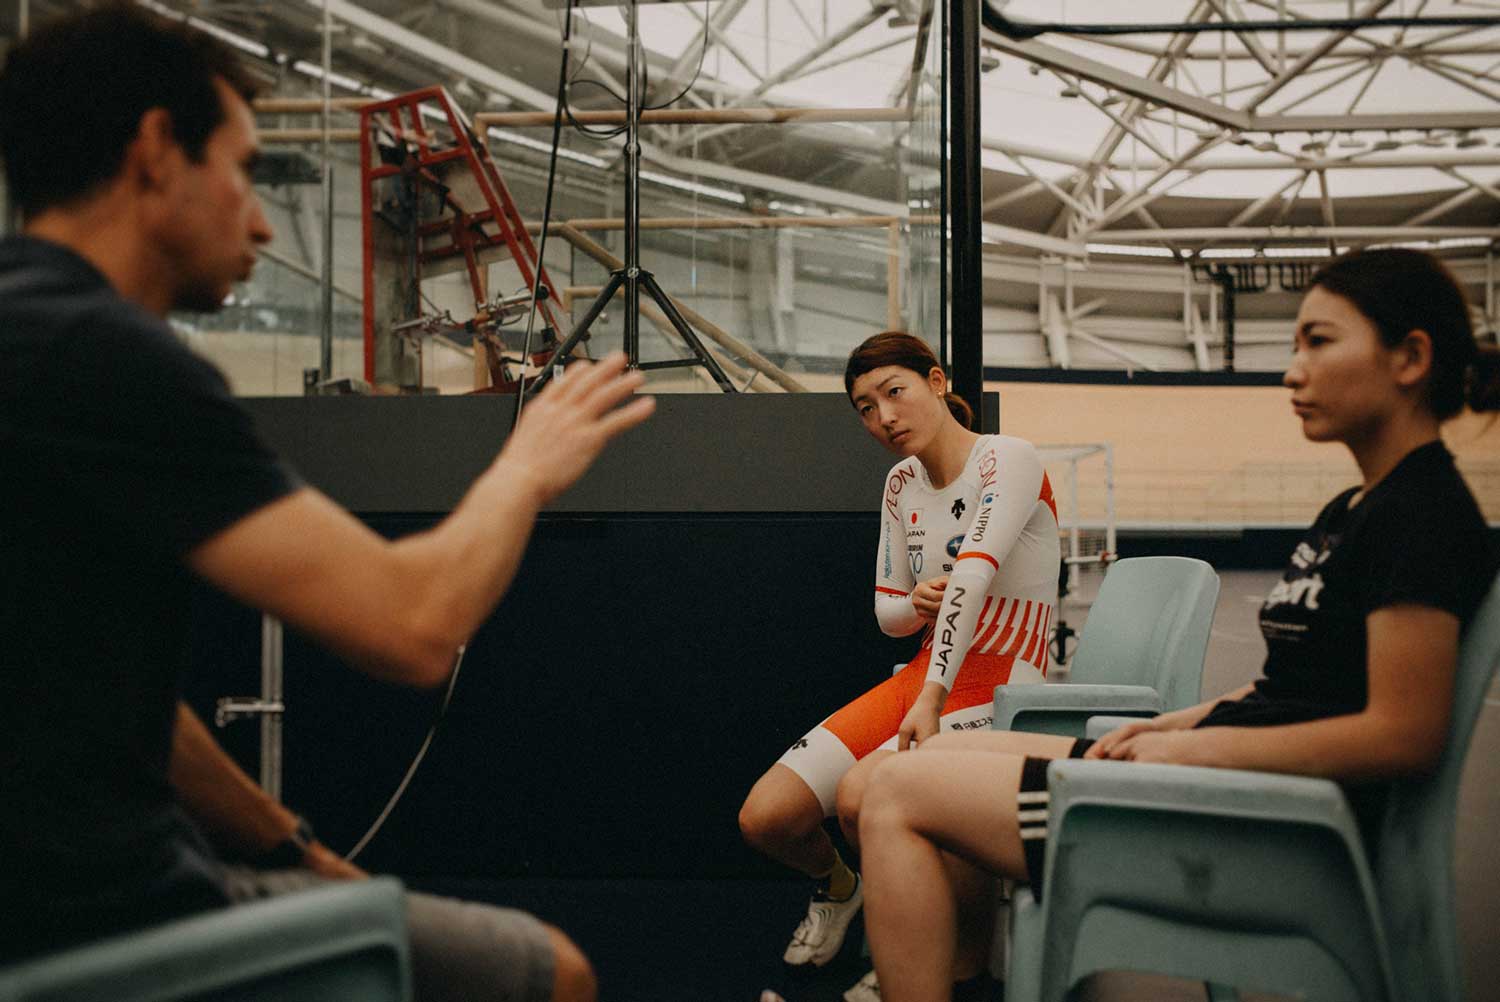 Japanese track cyclist discuss performance with Biomechanist during training session at velodrome